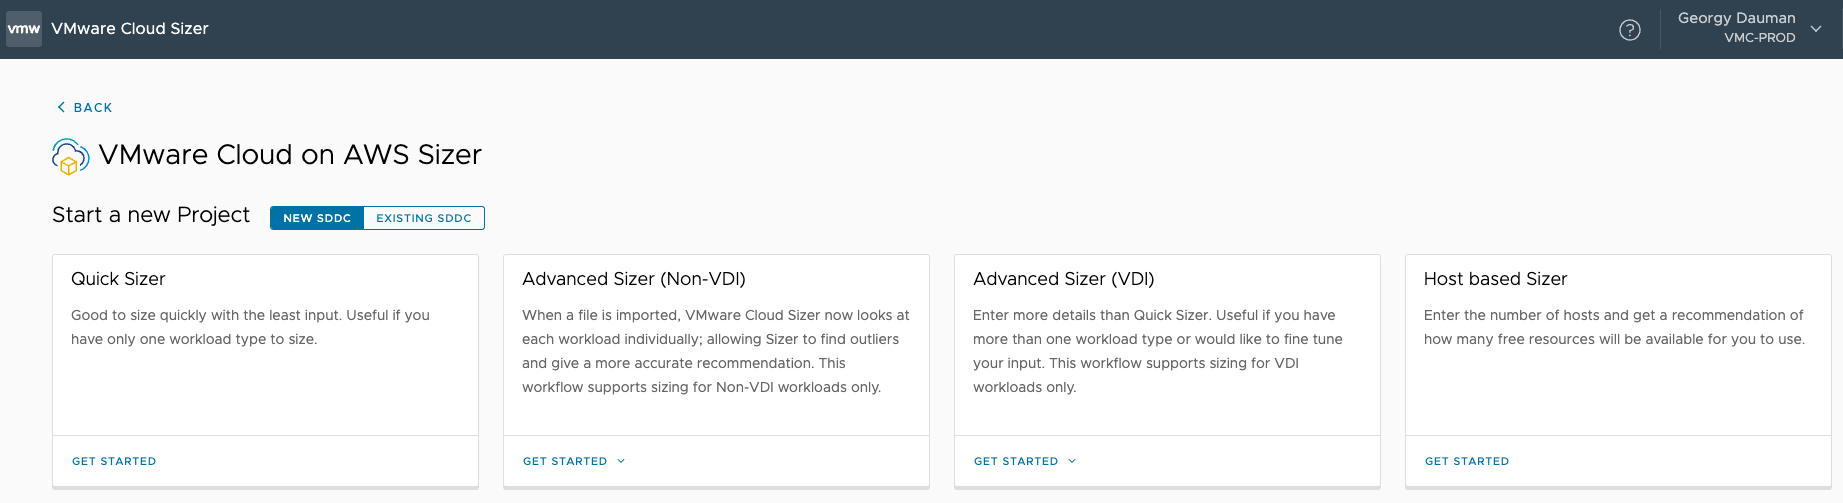 VMware Cloud Sizer Main Page